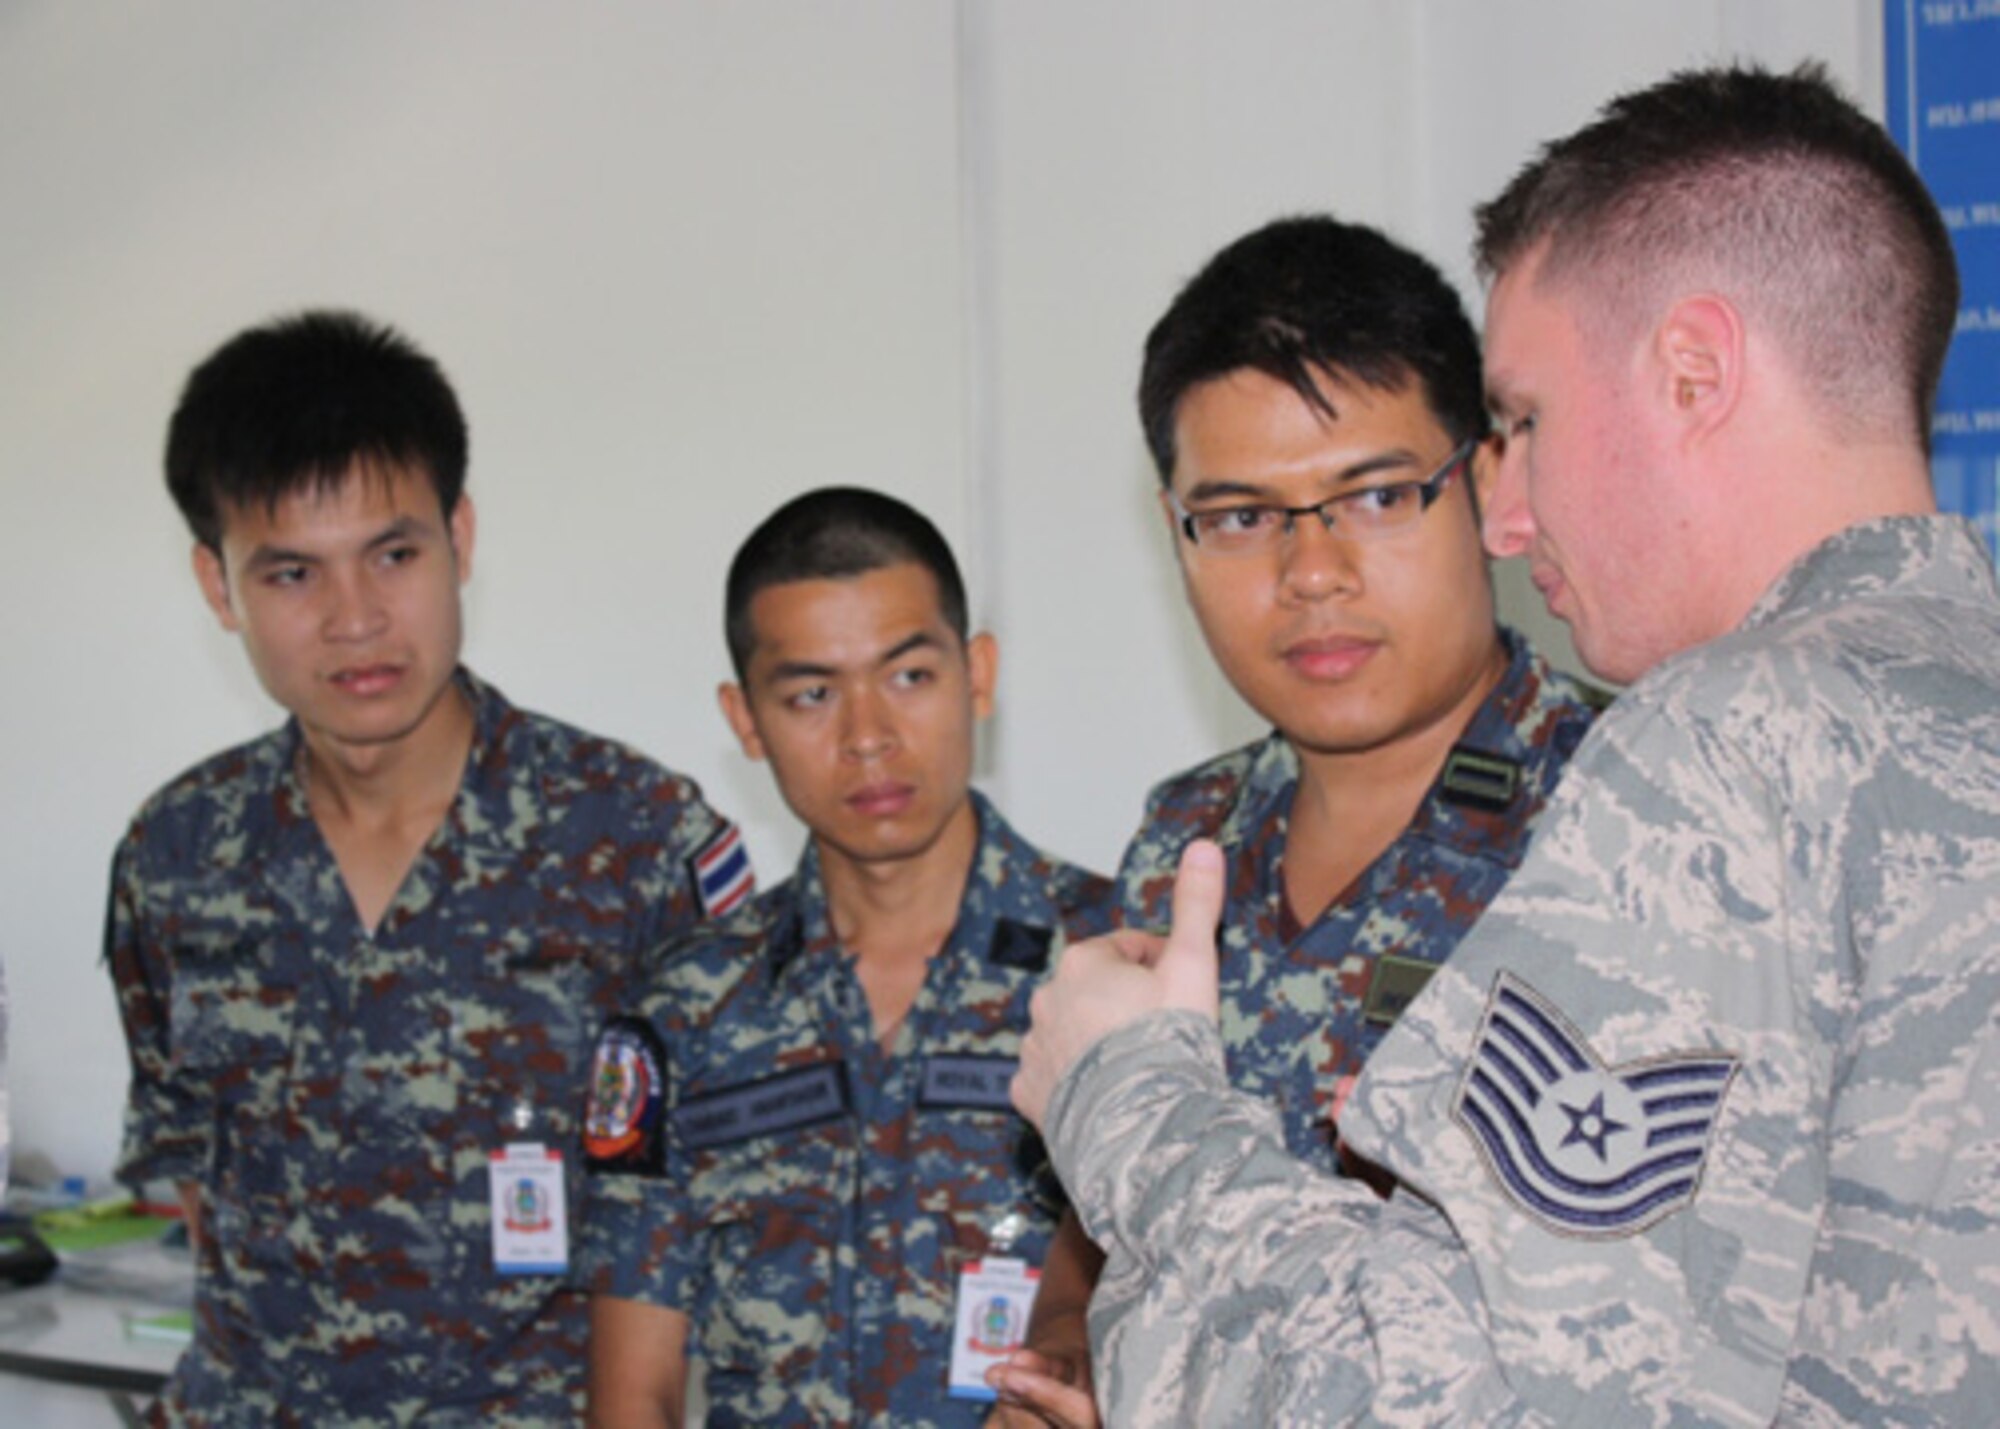 Tech. Sgt. Brian Harskey, a 157th Air Operations Group intelligence specialist, speaks with his Royal Thai Air Force counterparts during Cobra Gold 2012 at Camp Suranaree in Korat, Thailand.  Cobra Gold is an annual Thai and U.S. co-sponsored joint and multinational exercise that is designed is to improve partner nation interoperability and capacity to conduct joint and multinational planning, operations and to respond to crises with increased speed of response, mission effectiveness, and unity of effort. (Courtesy Photo, Royal Thai Air Force)